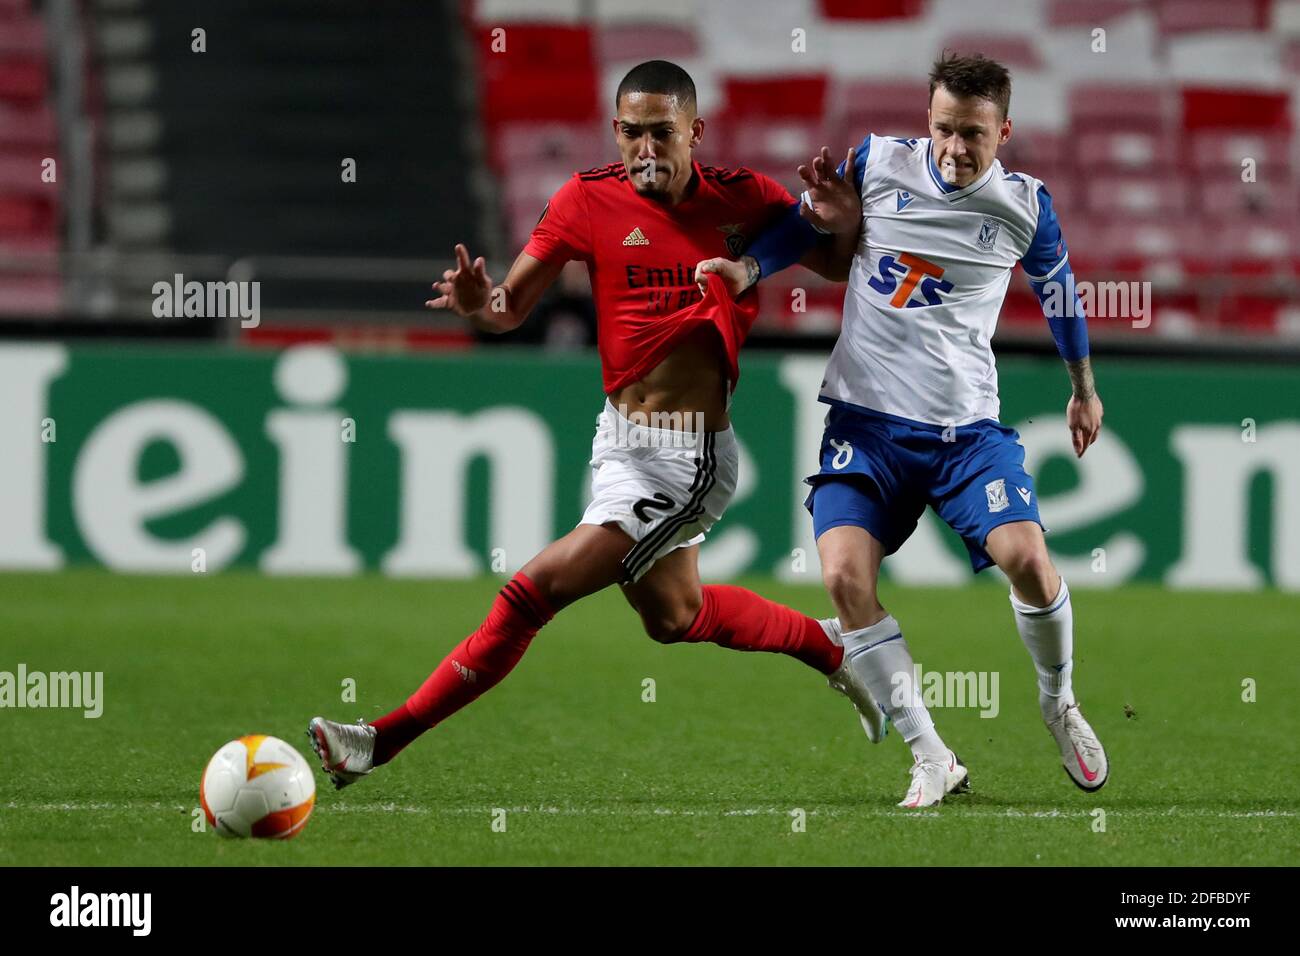 Lisbon. 3rd Dec, 2020. Gilberto (L) of SL Benfica vies with Jan Sykora of Lech Poznan during the UEFA Europa League group D football match between SL Benfica and Lech Poznan in Lisbon, Portugal on Dec. 3, 2020. Credit: Pedro Fiuza/Xinhua/Alamy Live News Stock Photo